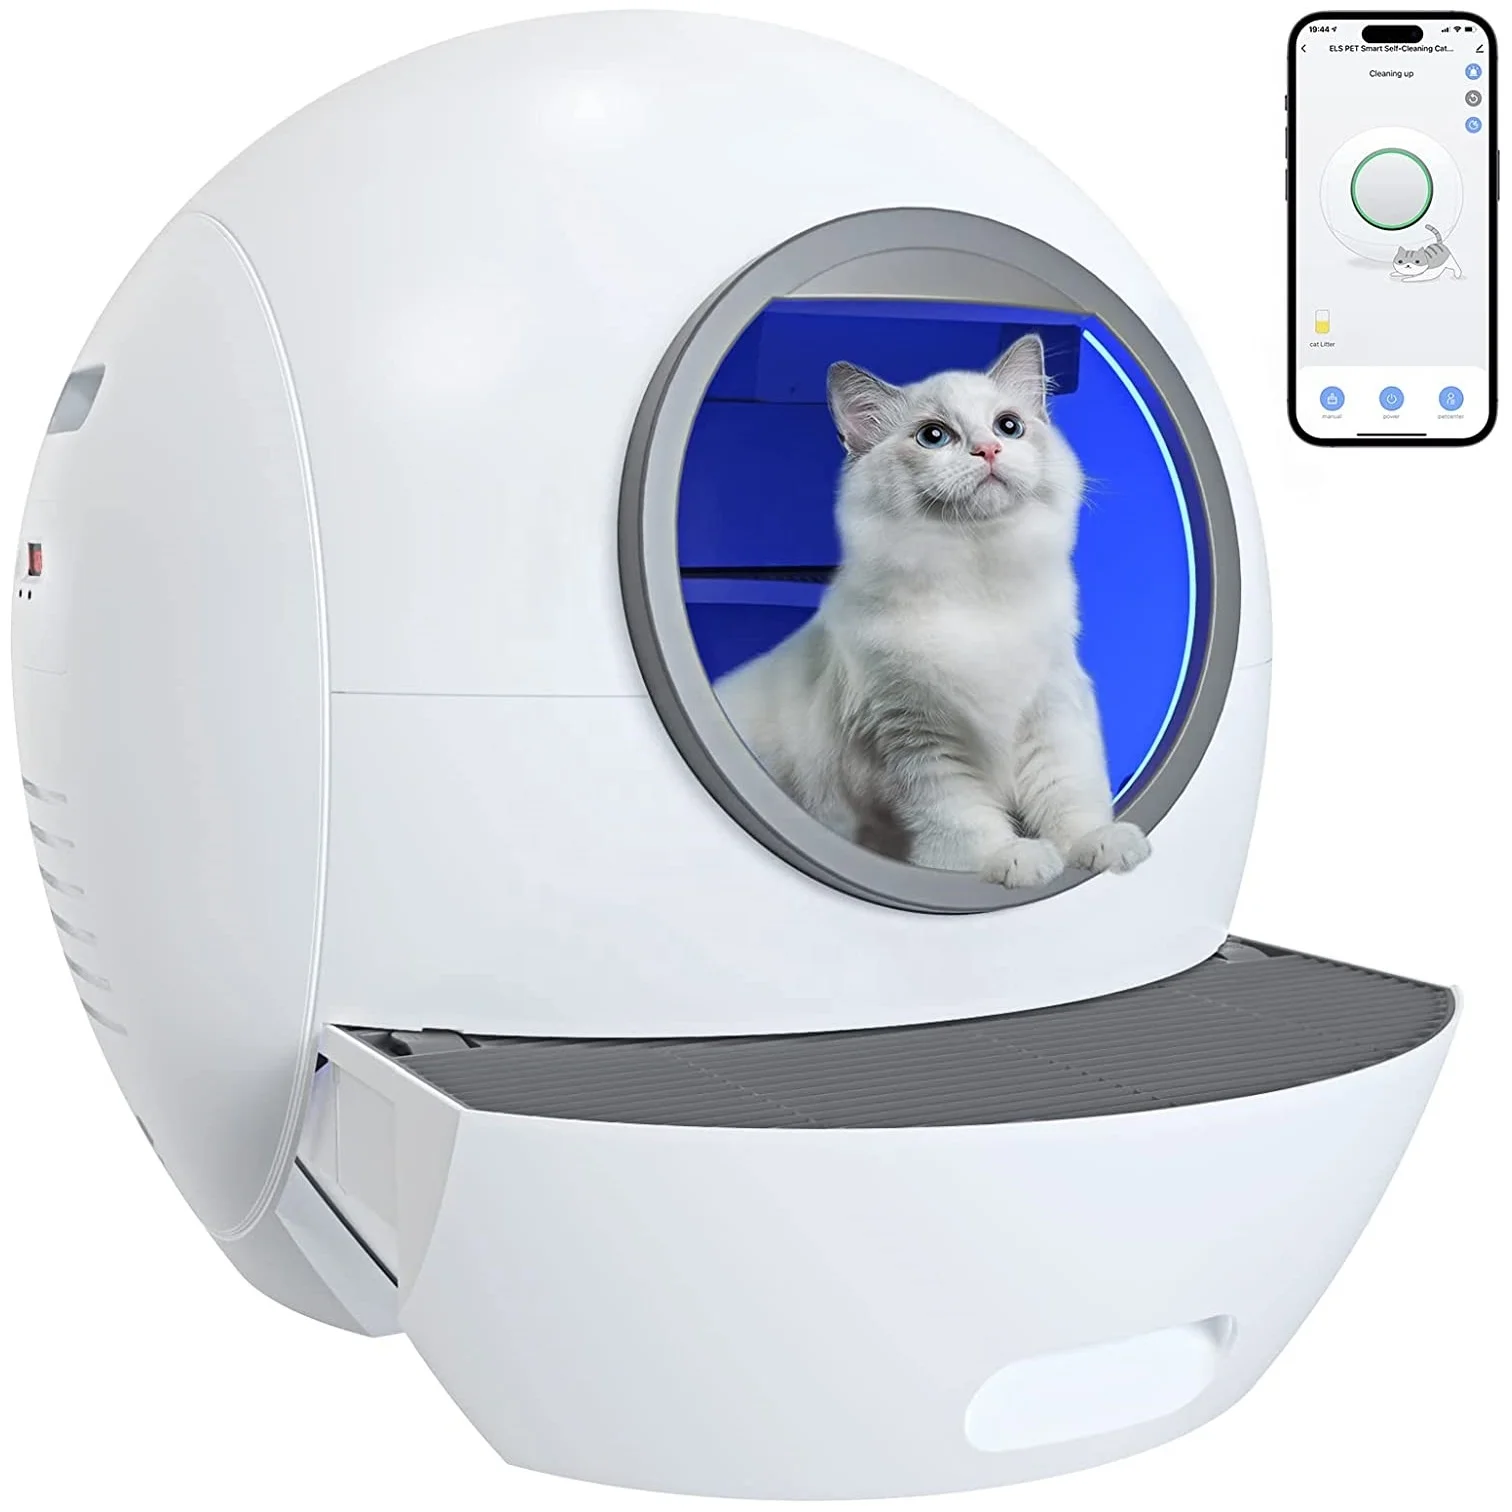 

Smart Fully Enclosed Quick Cleaning Cats Litter Toilet APP Remote Control Auto Self-cleaning Automatic Cat Litter Box